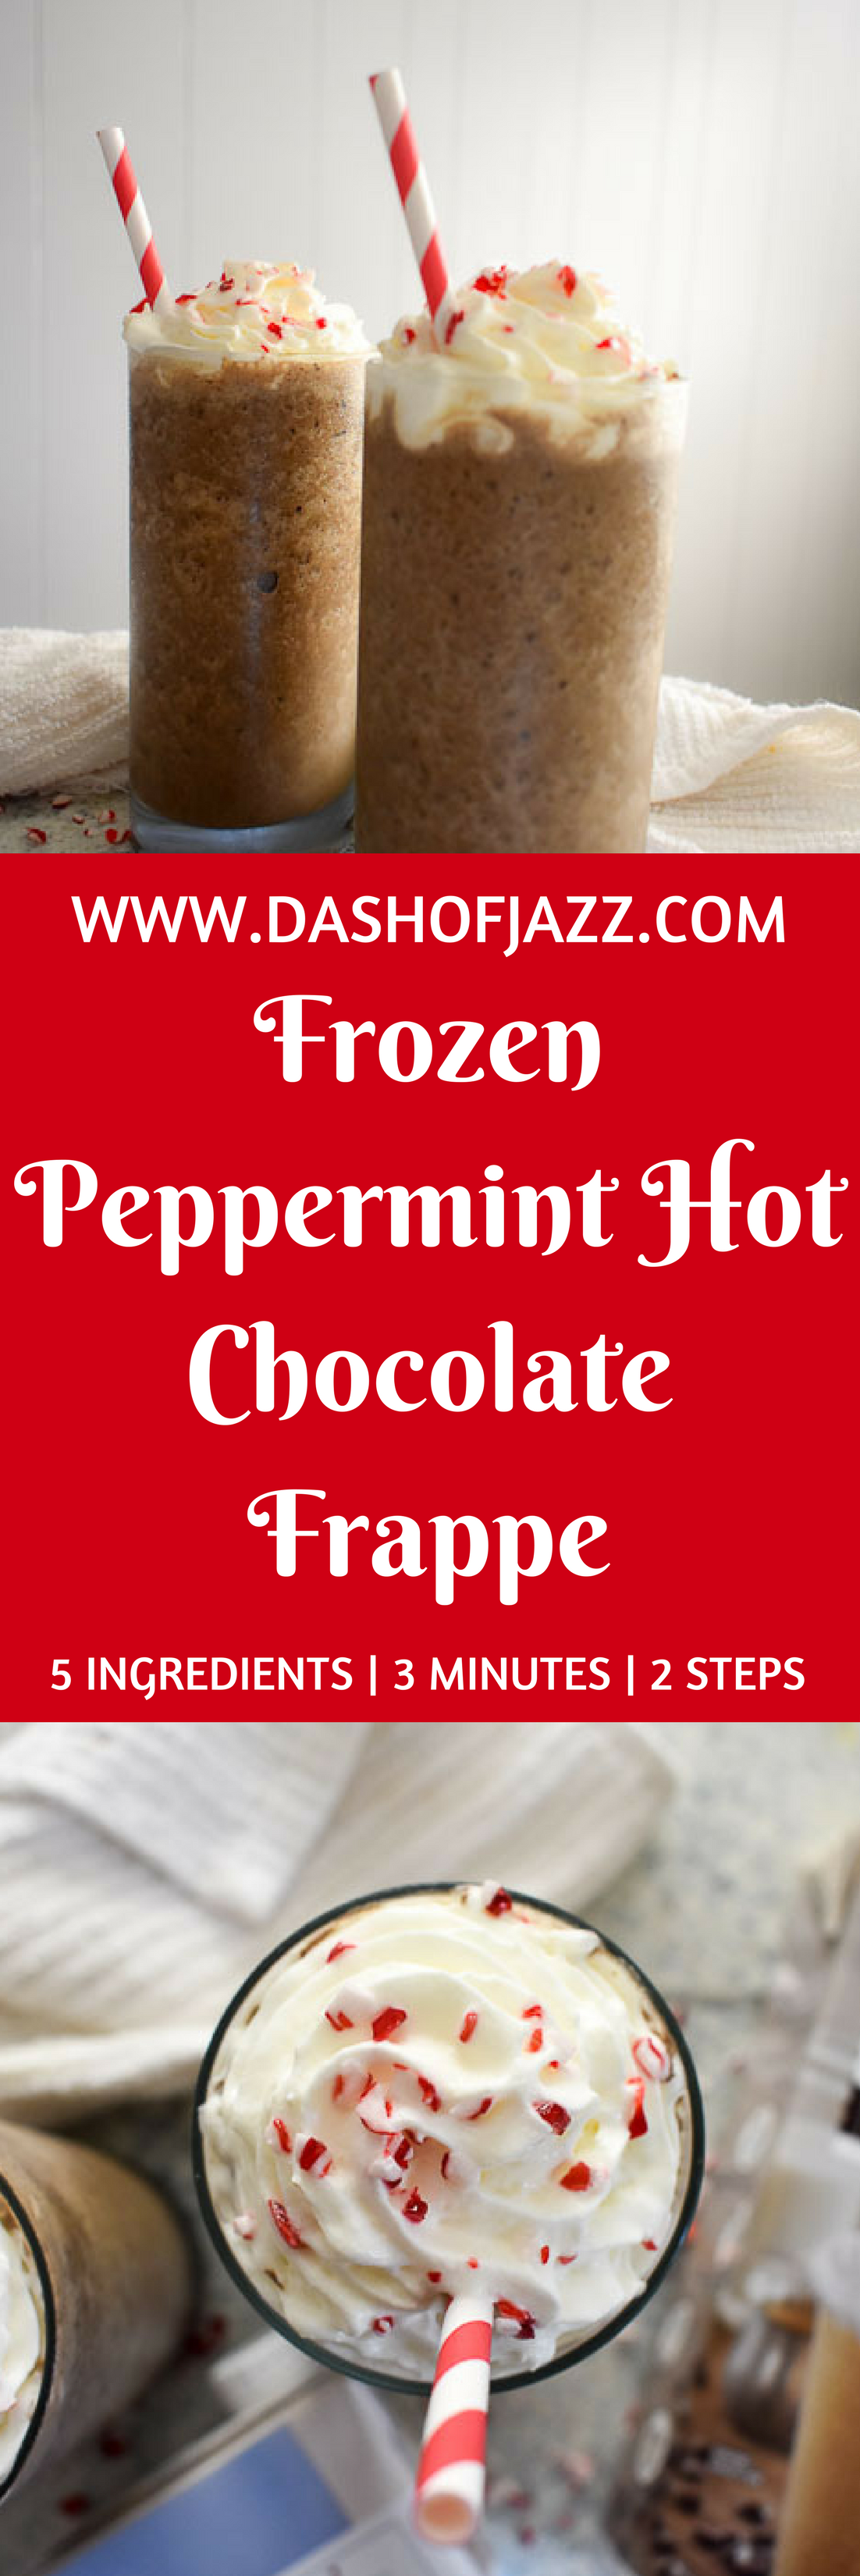 Frozen Peppermint Hot Cocoa Frappe